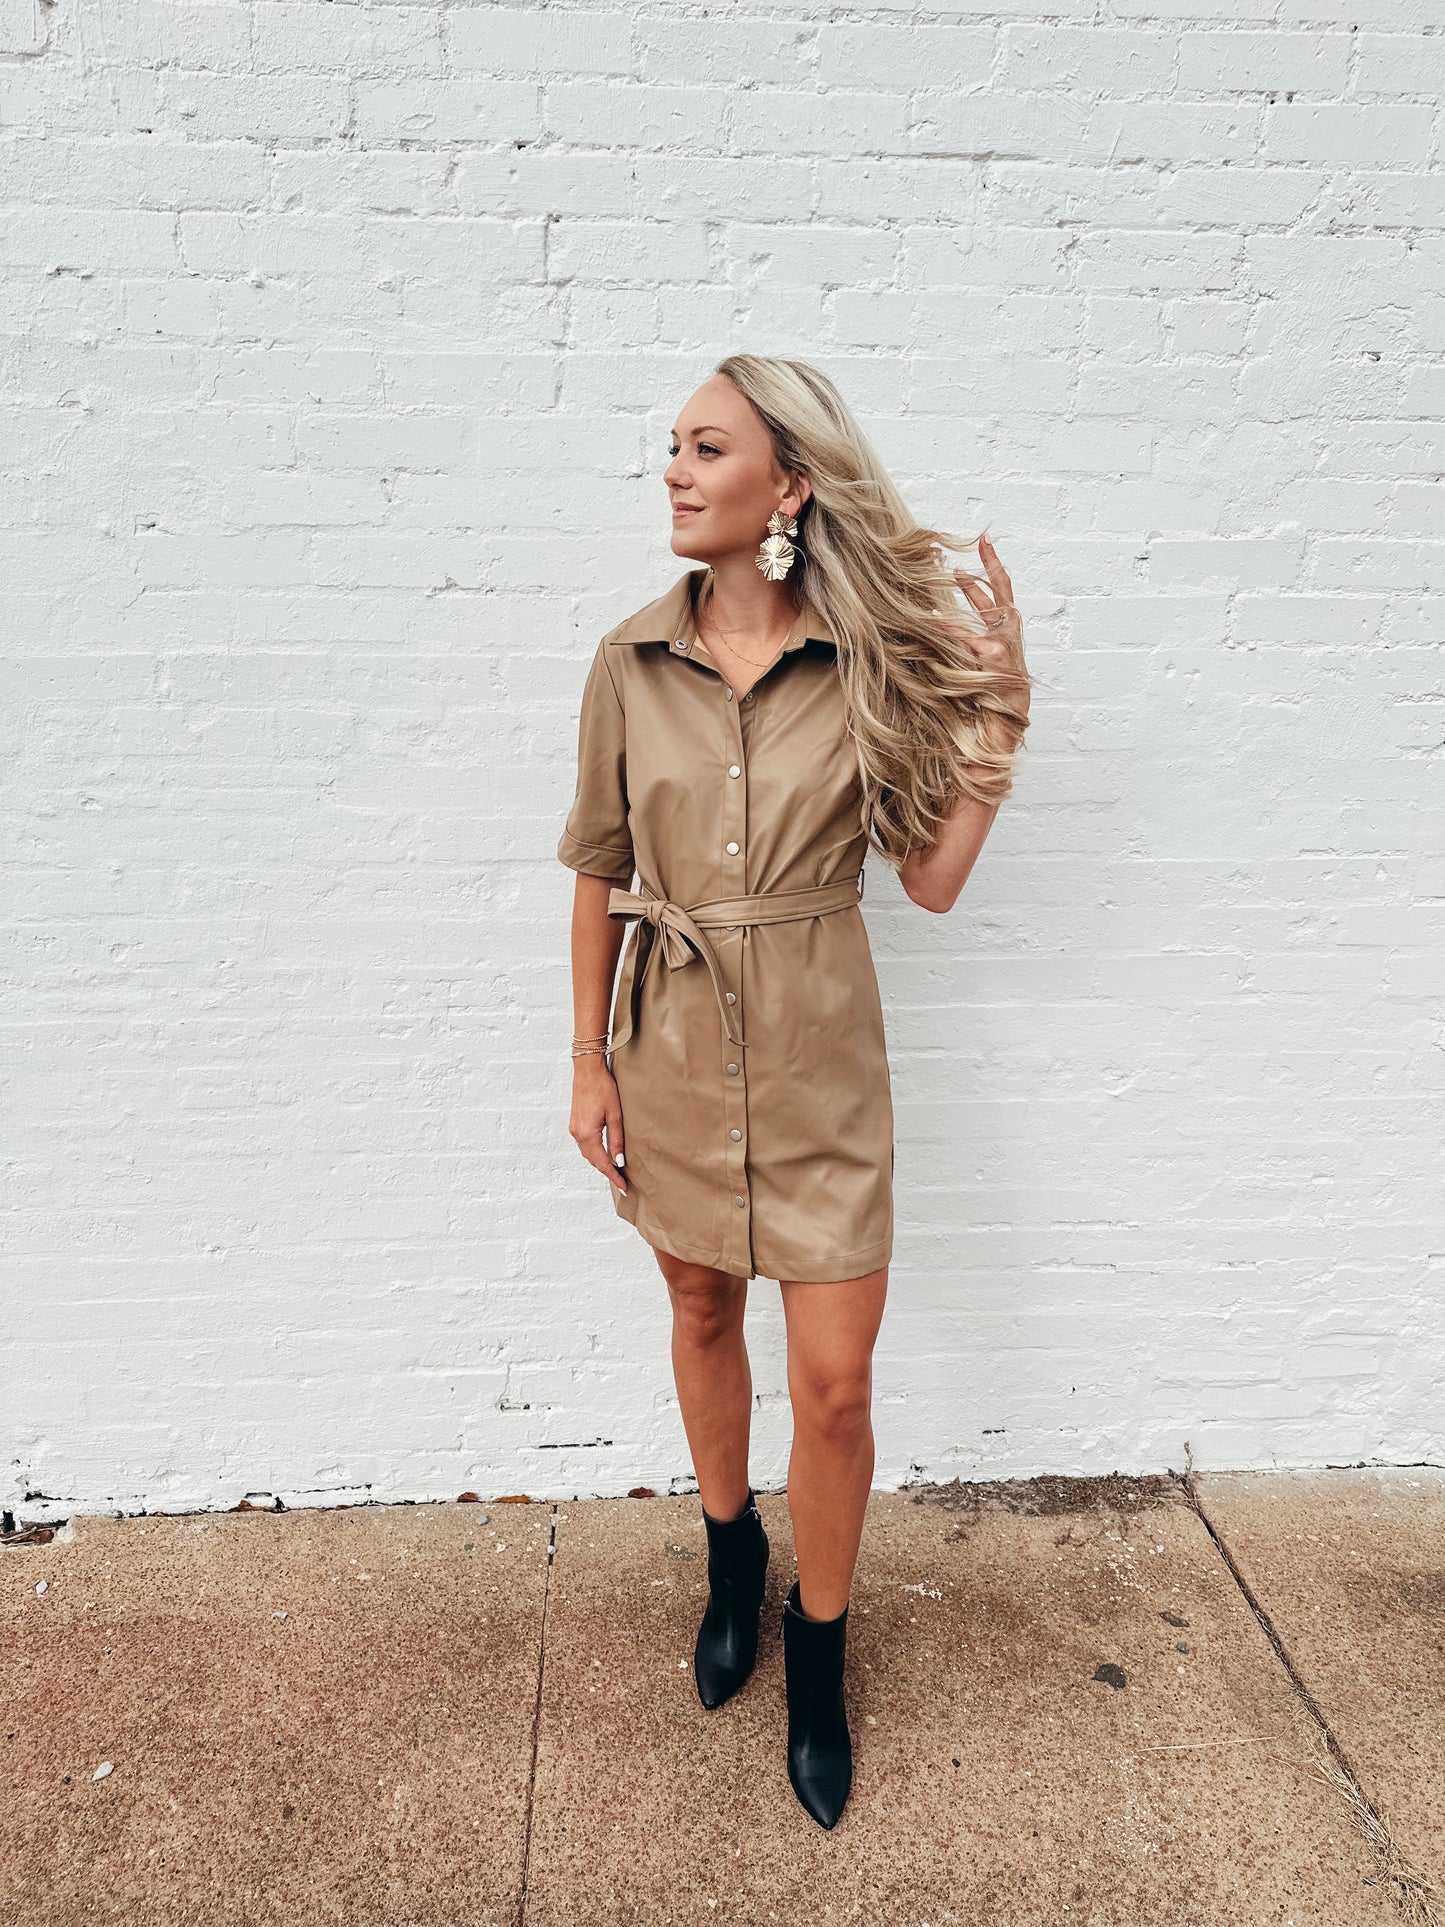 The Kathryn Leather Dress